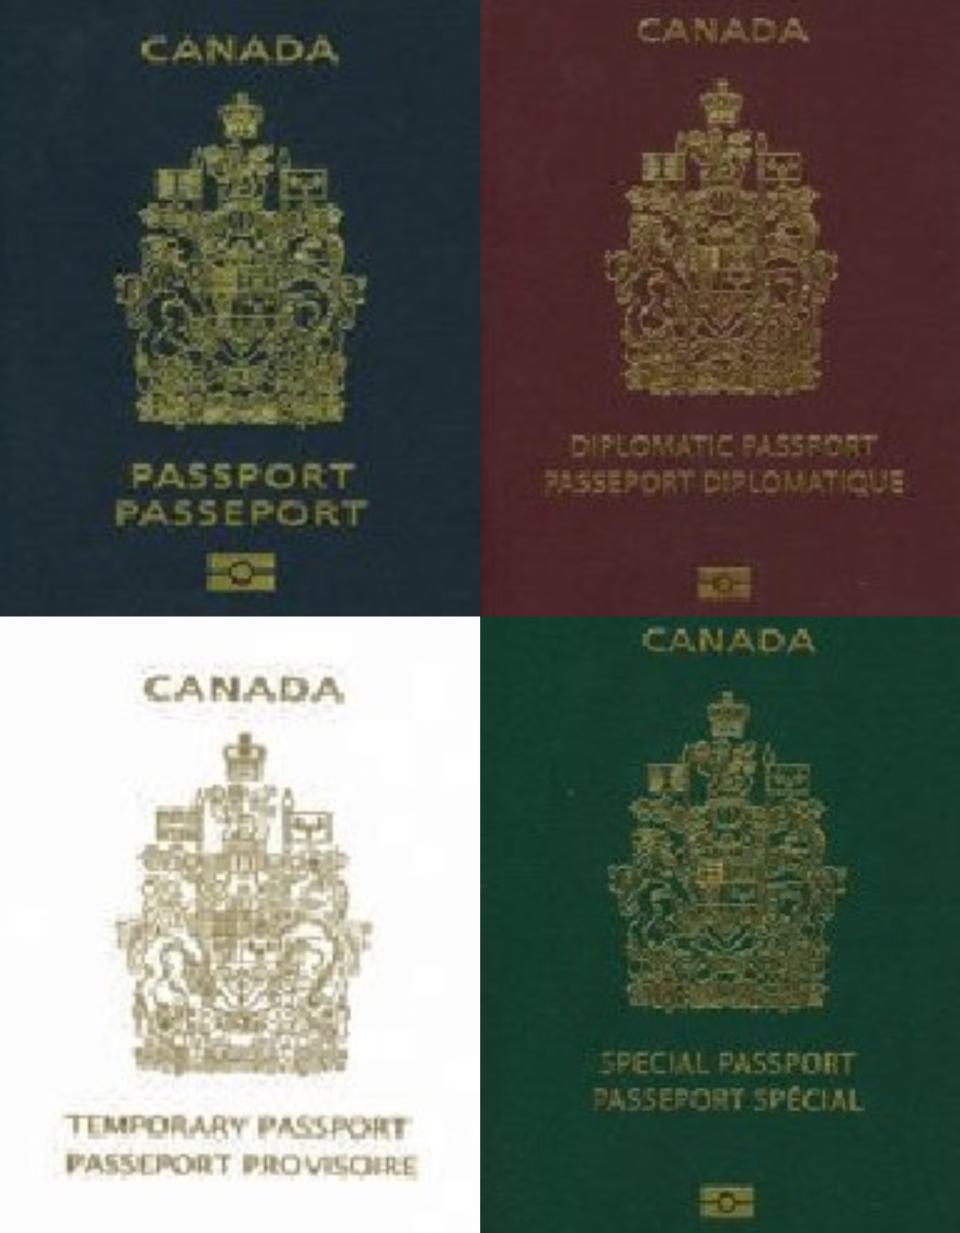 Four types of Canadian passports, from the blue, regular passport (top left), a maroon, diplomatic passport (top right), a white, temporary passport (bottom left) and a green, special passport (bottom right).